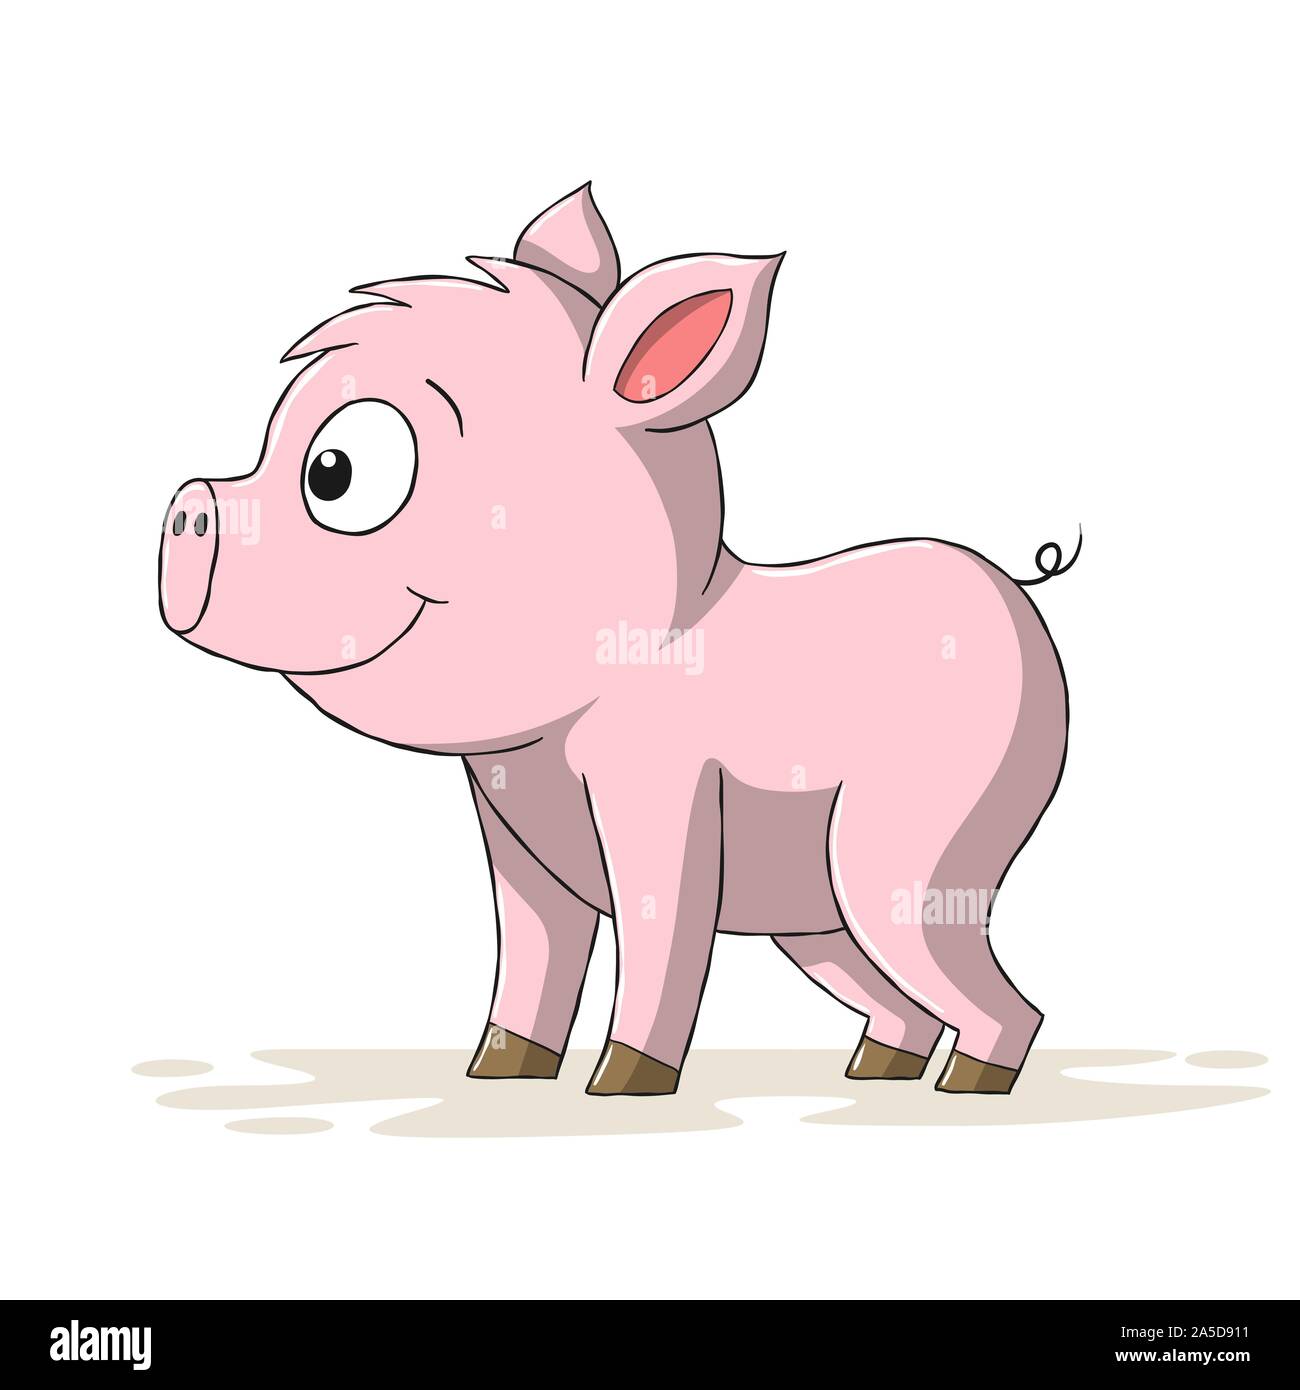 Funny cartoon pig. Hand drawn vector illustration with separate layers. Stock Vector